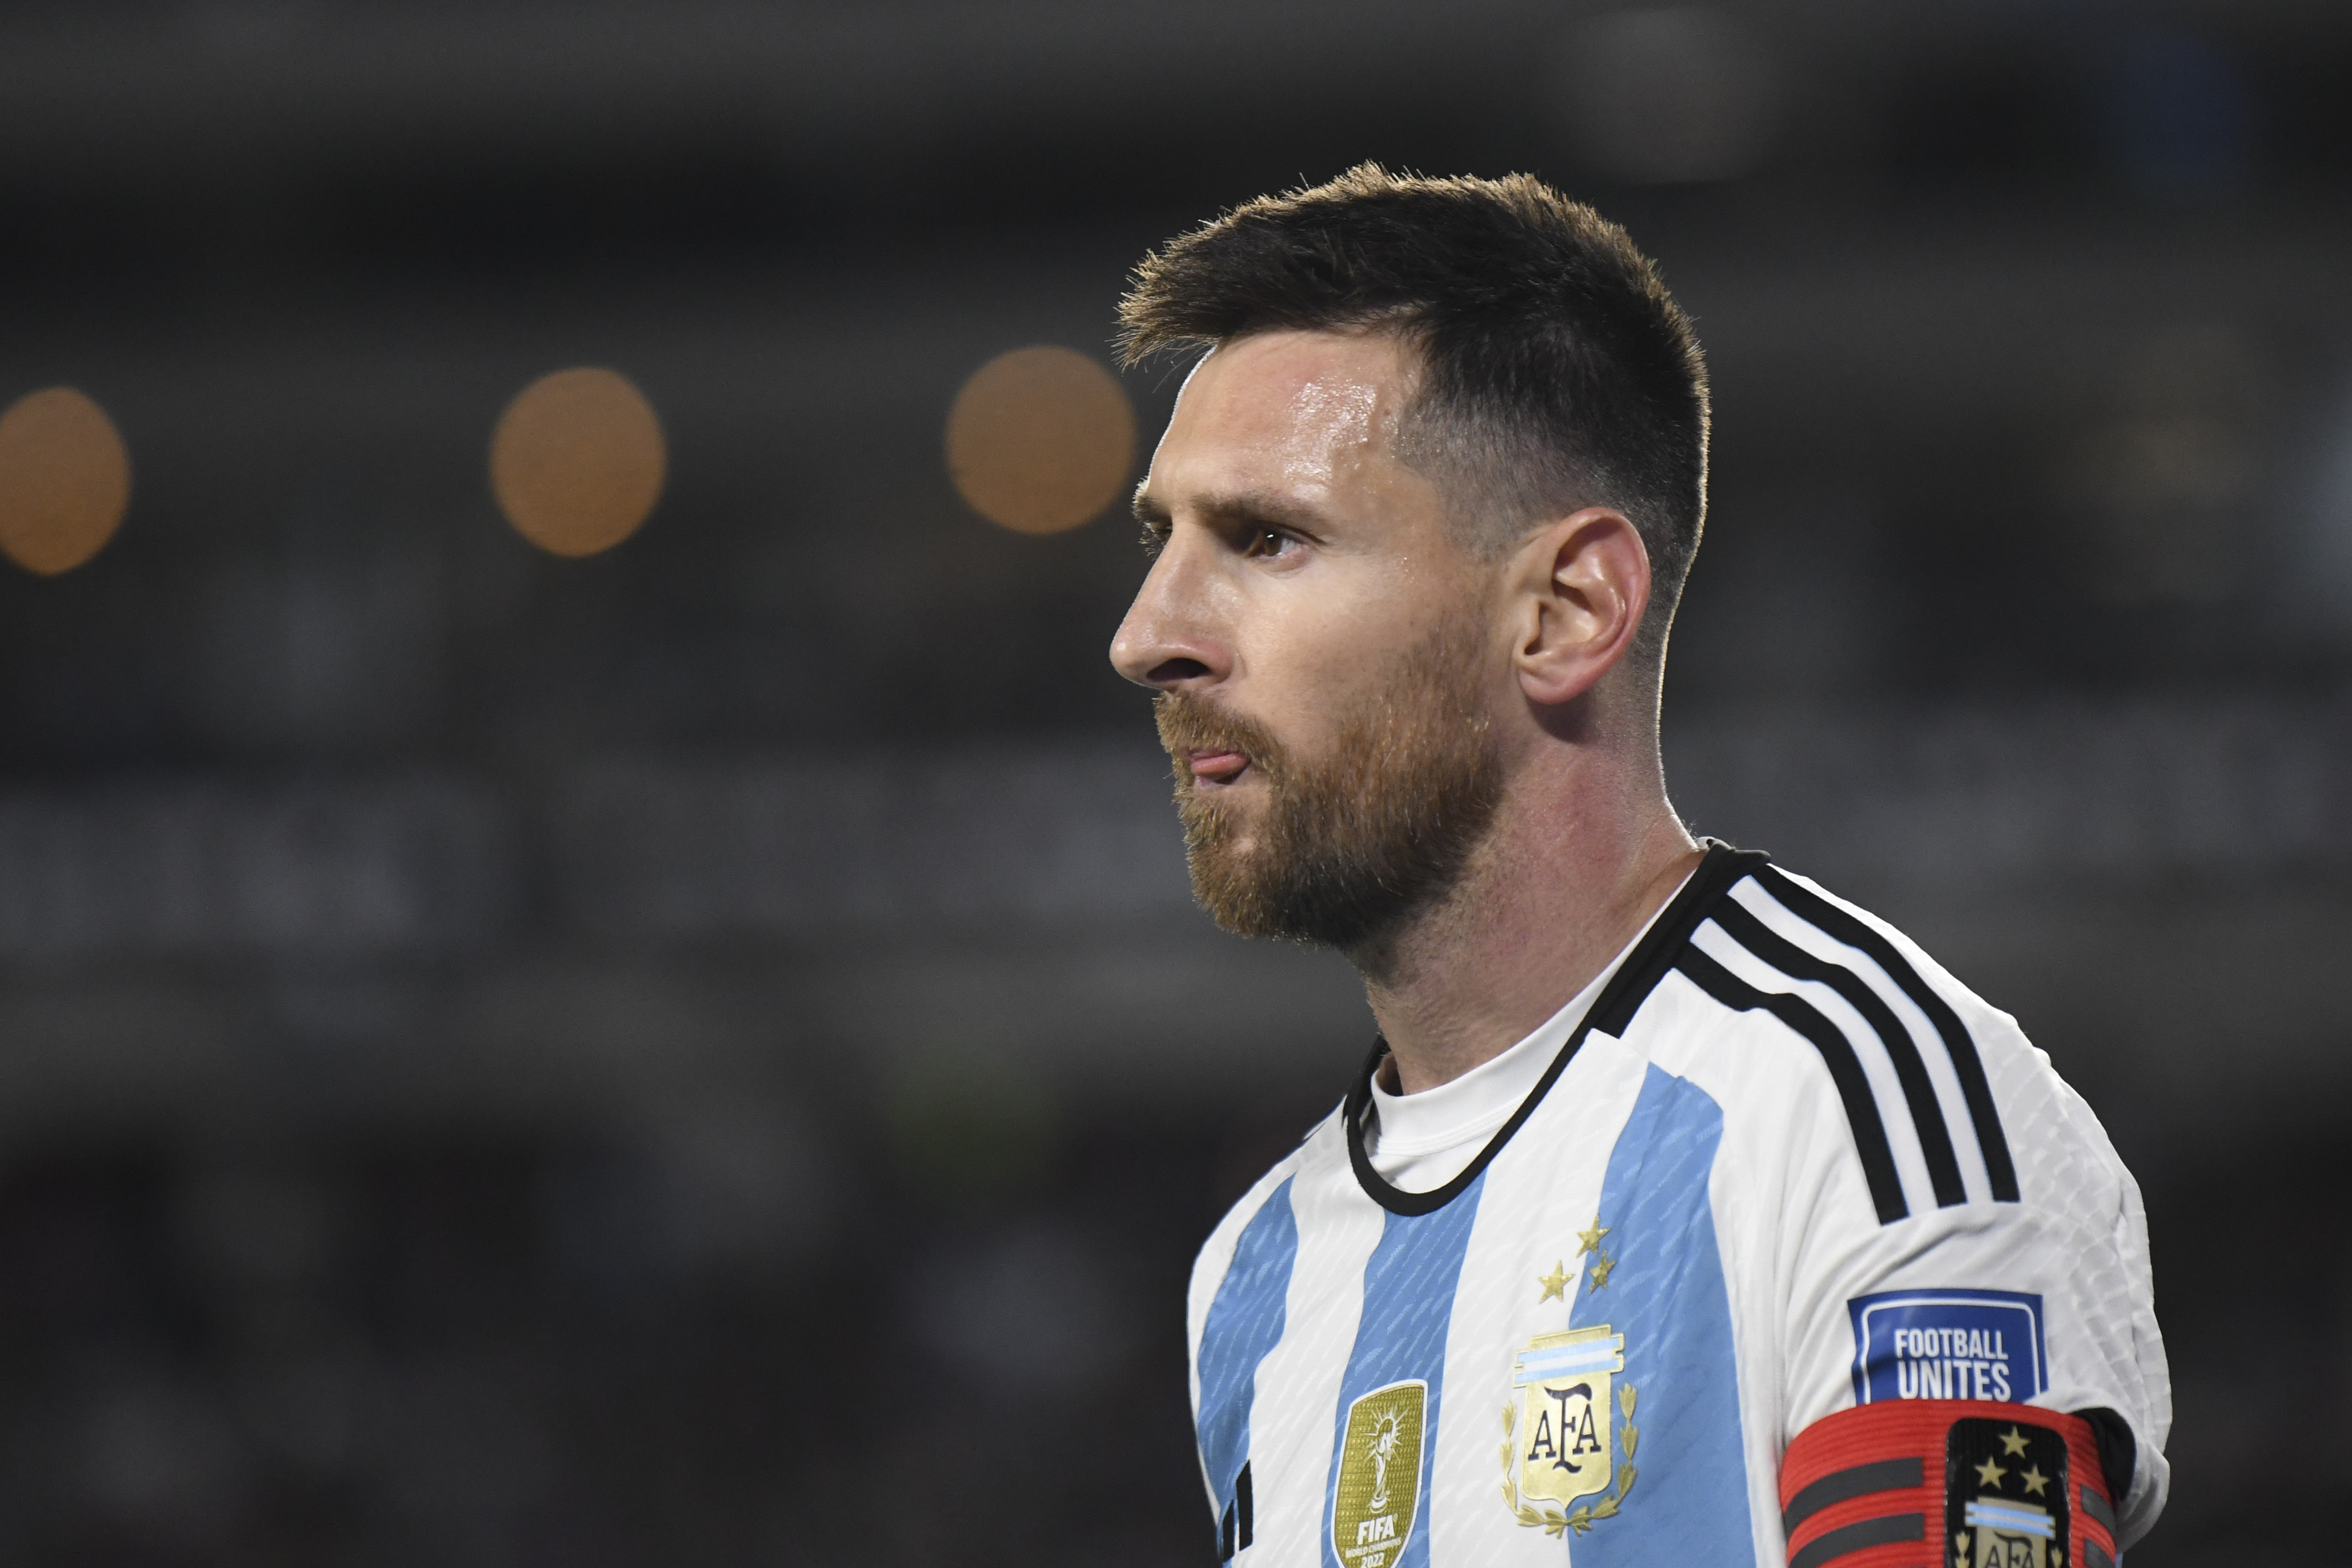 Messi plays one half in Argentina's 1-0 World Cup qualifying win